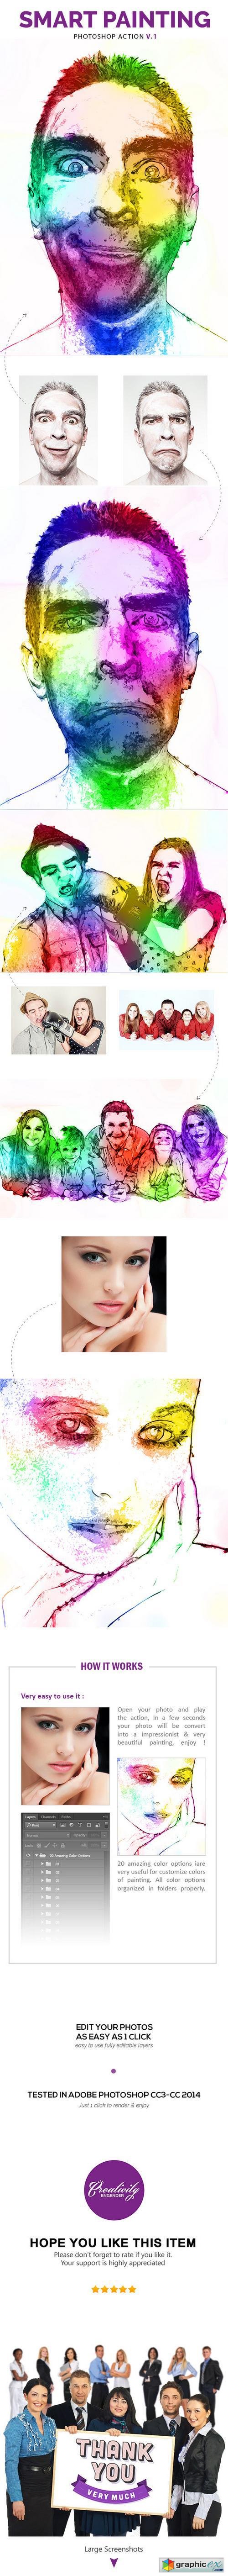 Smart Painting Vol.1 - Photoshop Action